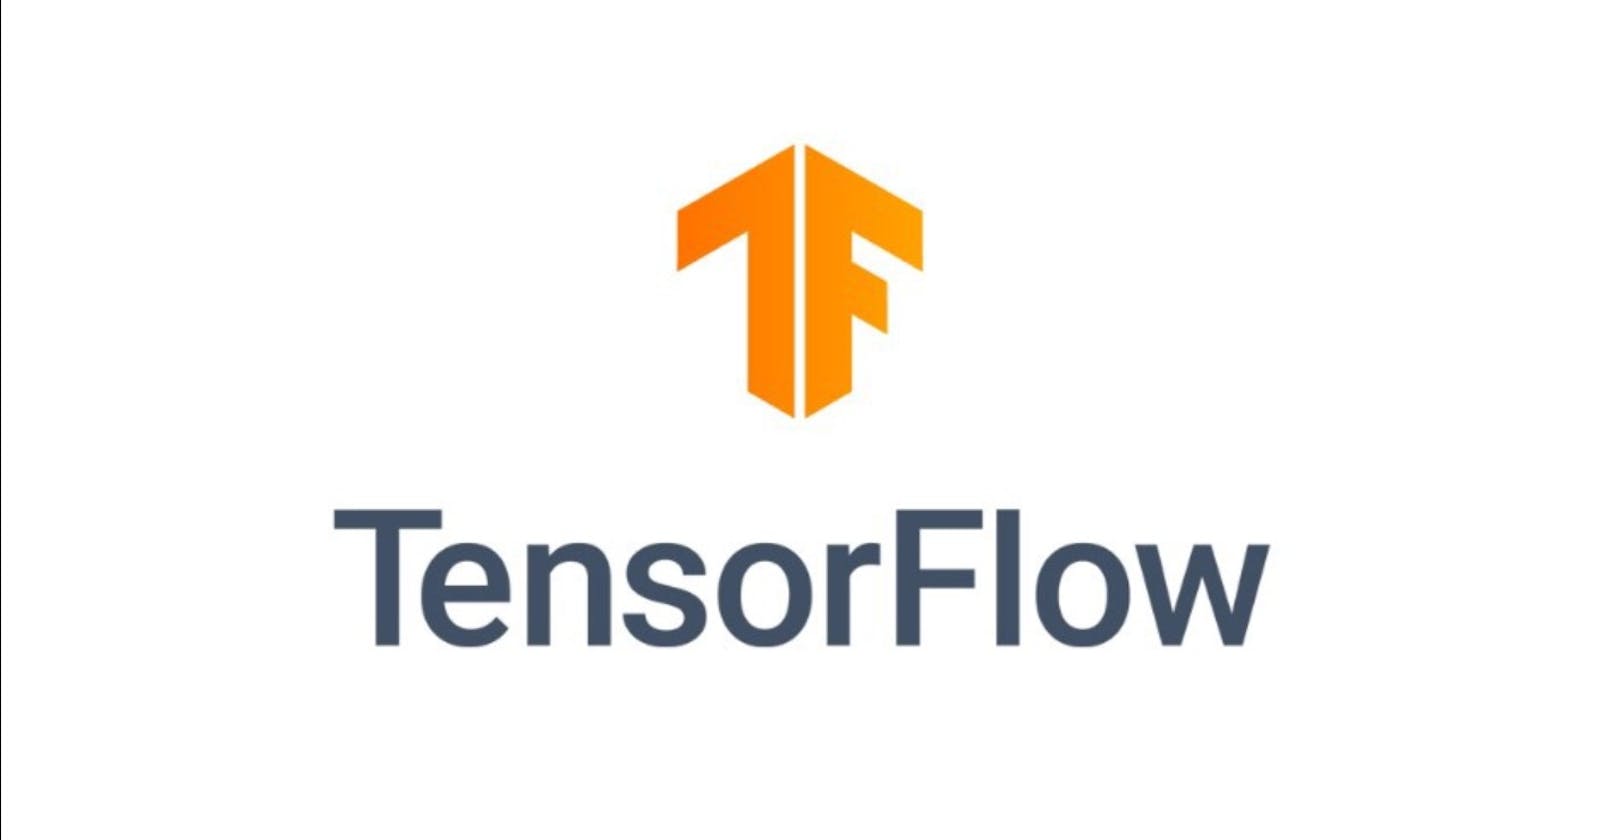 How did I install TensorFlow after struggling for a week!